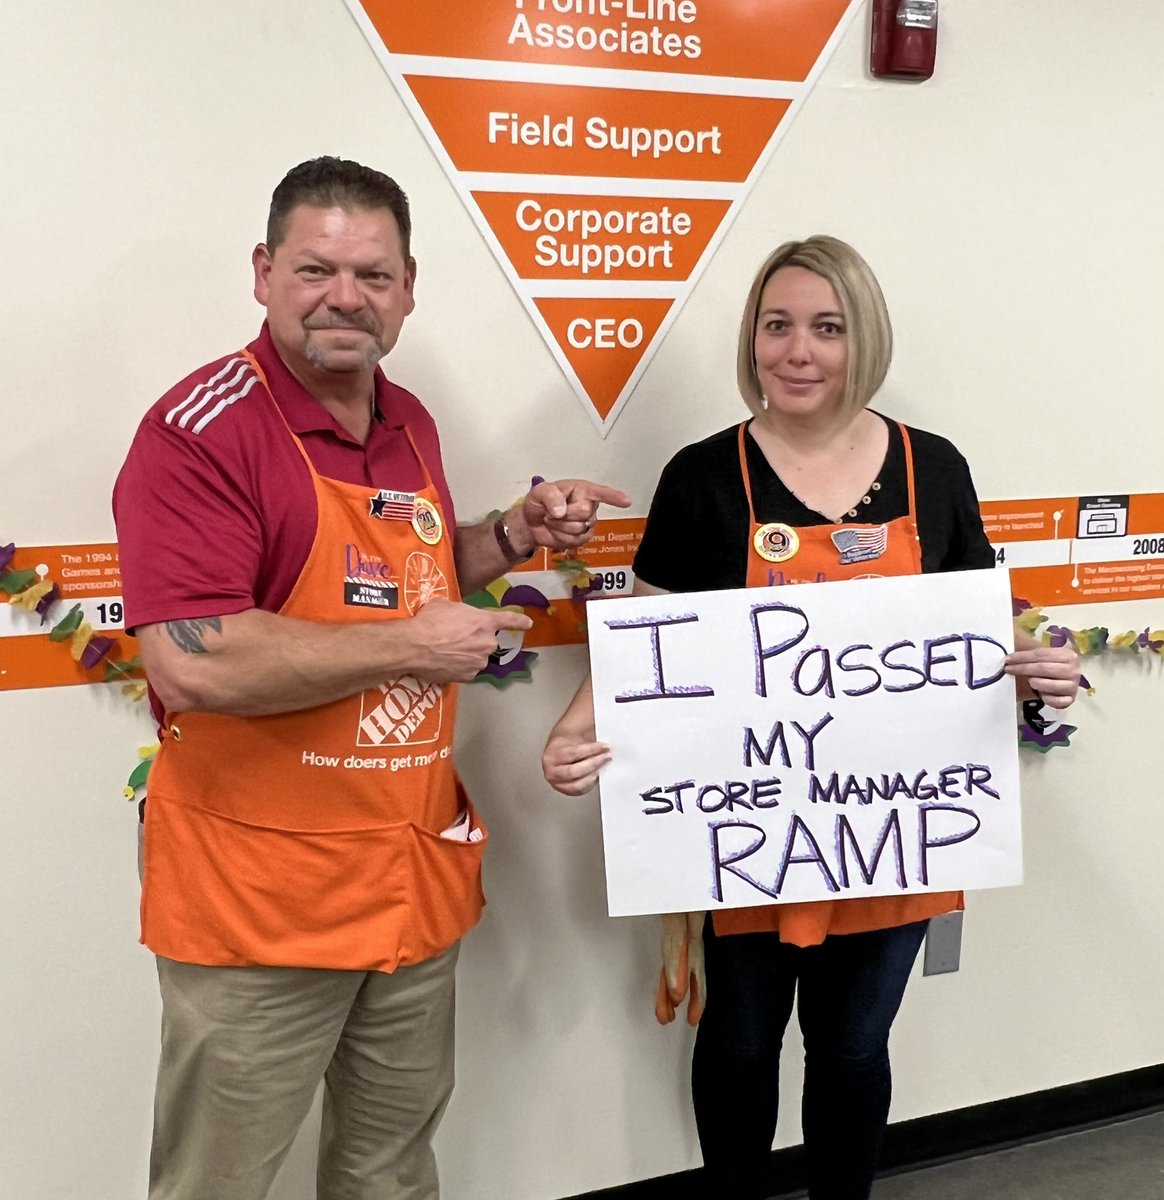 Huge congratulations to my OASM Nicole. She just got her RAMP results and she passed!!! Congratulations Nicole your futures so bright you gotta wear shades. @garland_haynes @keren_gorg @thewaysheROLS @mark_bolieu @Mike_ProMRO6863 @SpecialtyN @gunnerwills13 @nicole_harmon7